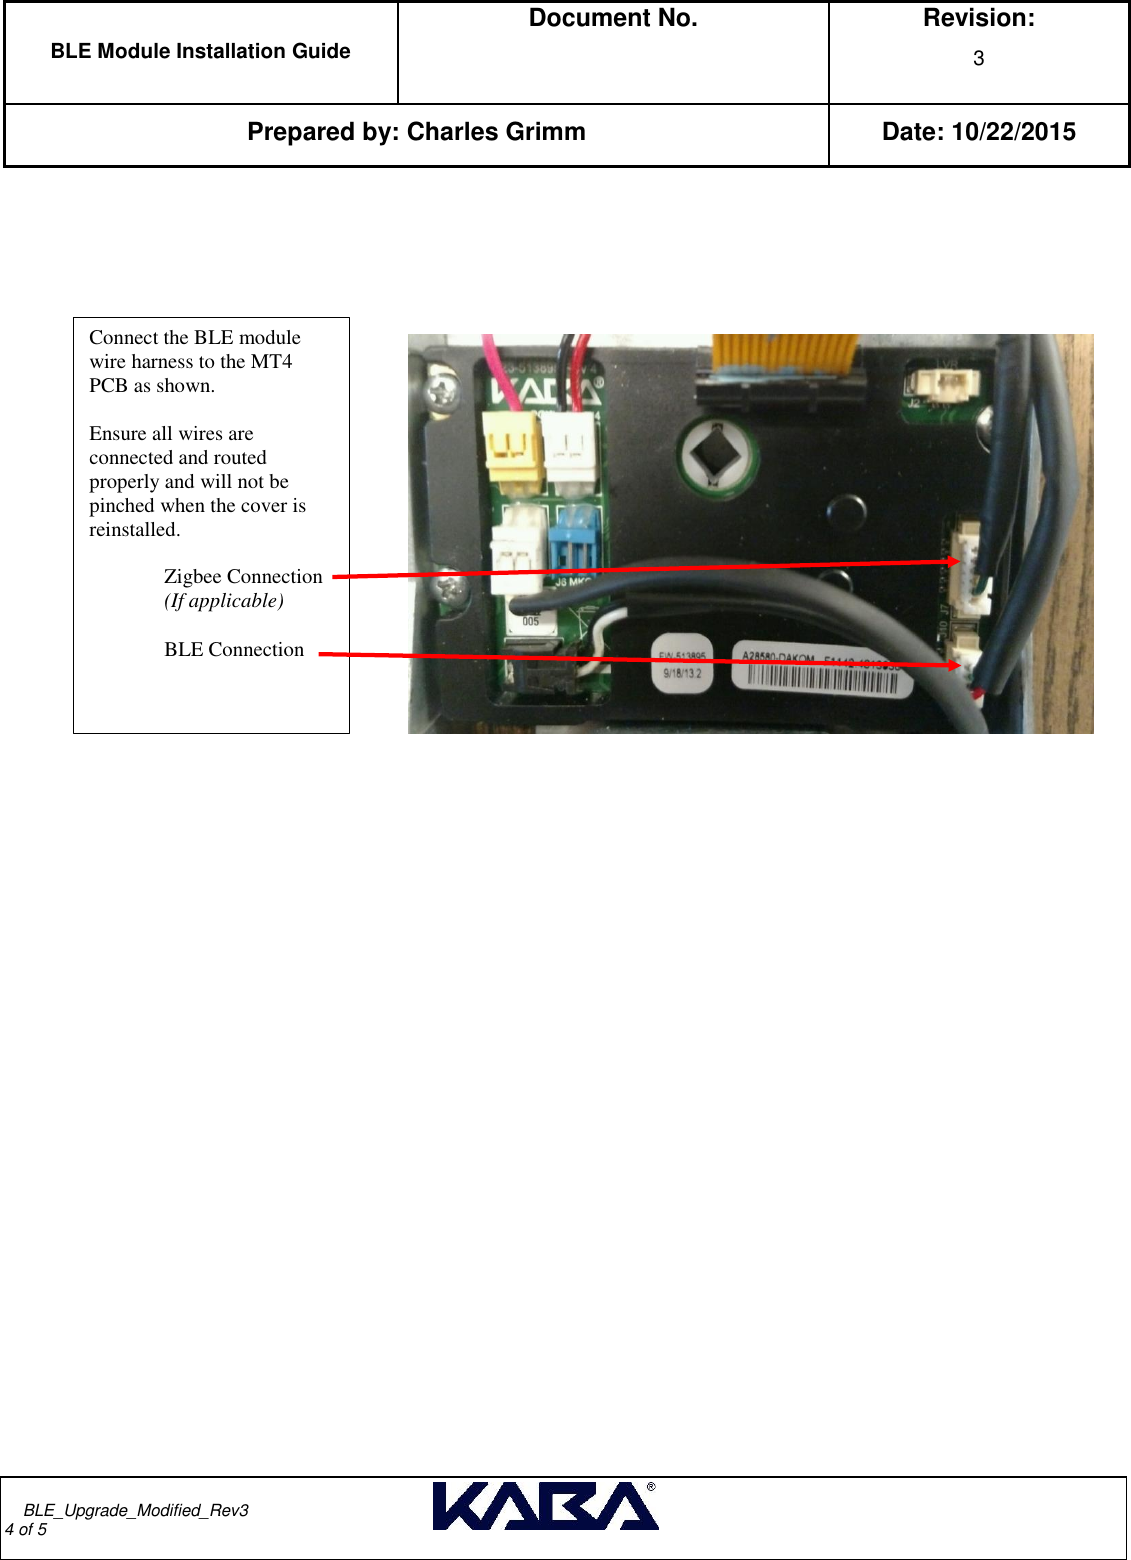  BLE Module Installation Guide  Document No.  Revision: 3   Prepared by: Charles Grimm Date: 10/22/2015         BLE_Upgrade_Modified_Rev3                                                                                                                                                                                       4 of 5                              Connect the BLE module wire harness to the MT4 PCB as shown.  Ensure all wires are connected and routed properly and will not be pinched when the cover is reinstalled.   Zigbee Connection  (If applicable)  BLE Connection 